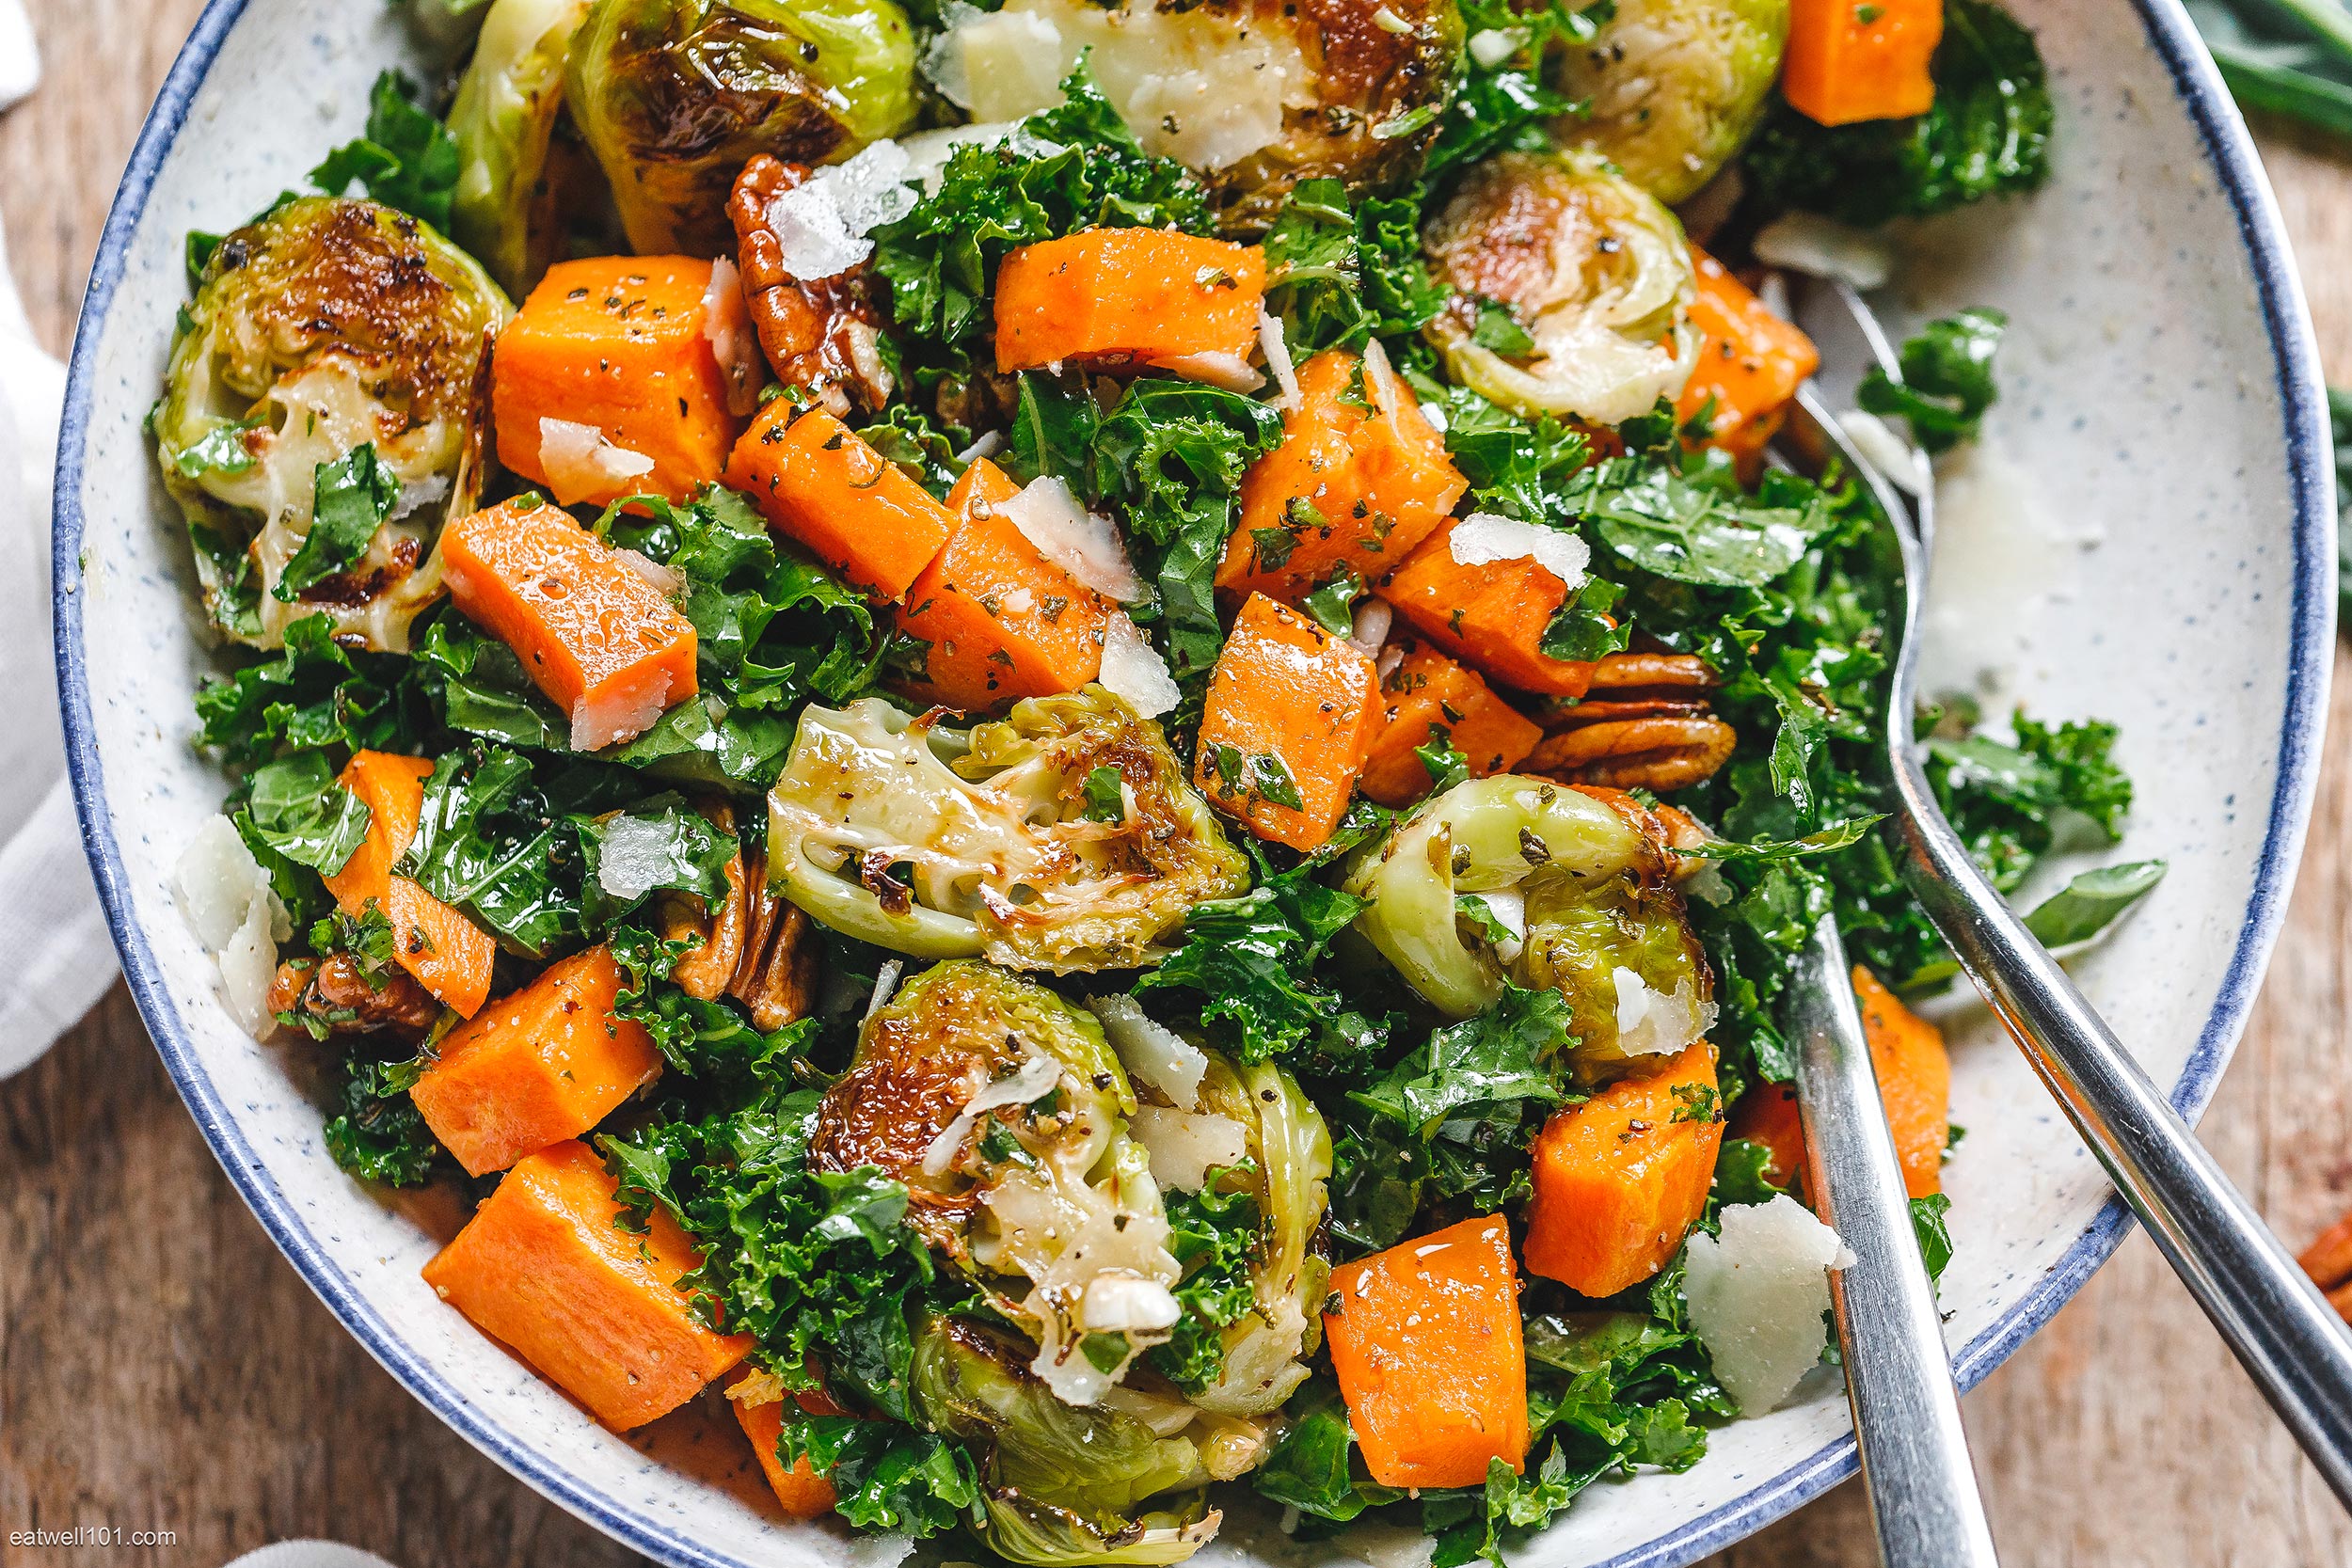 Roasted Sweet Potato, Brussels Sprout & Kale Salad